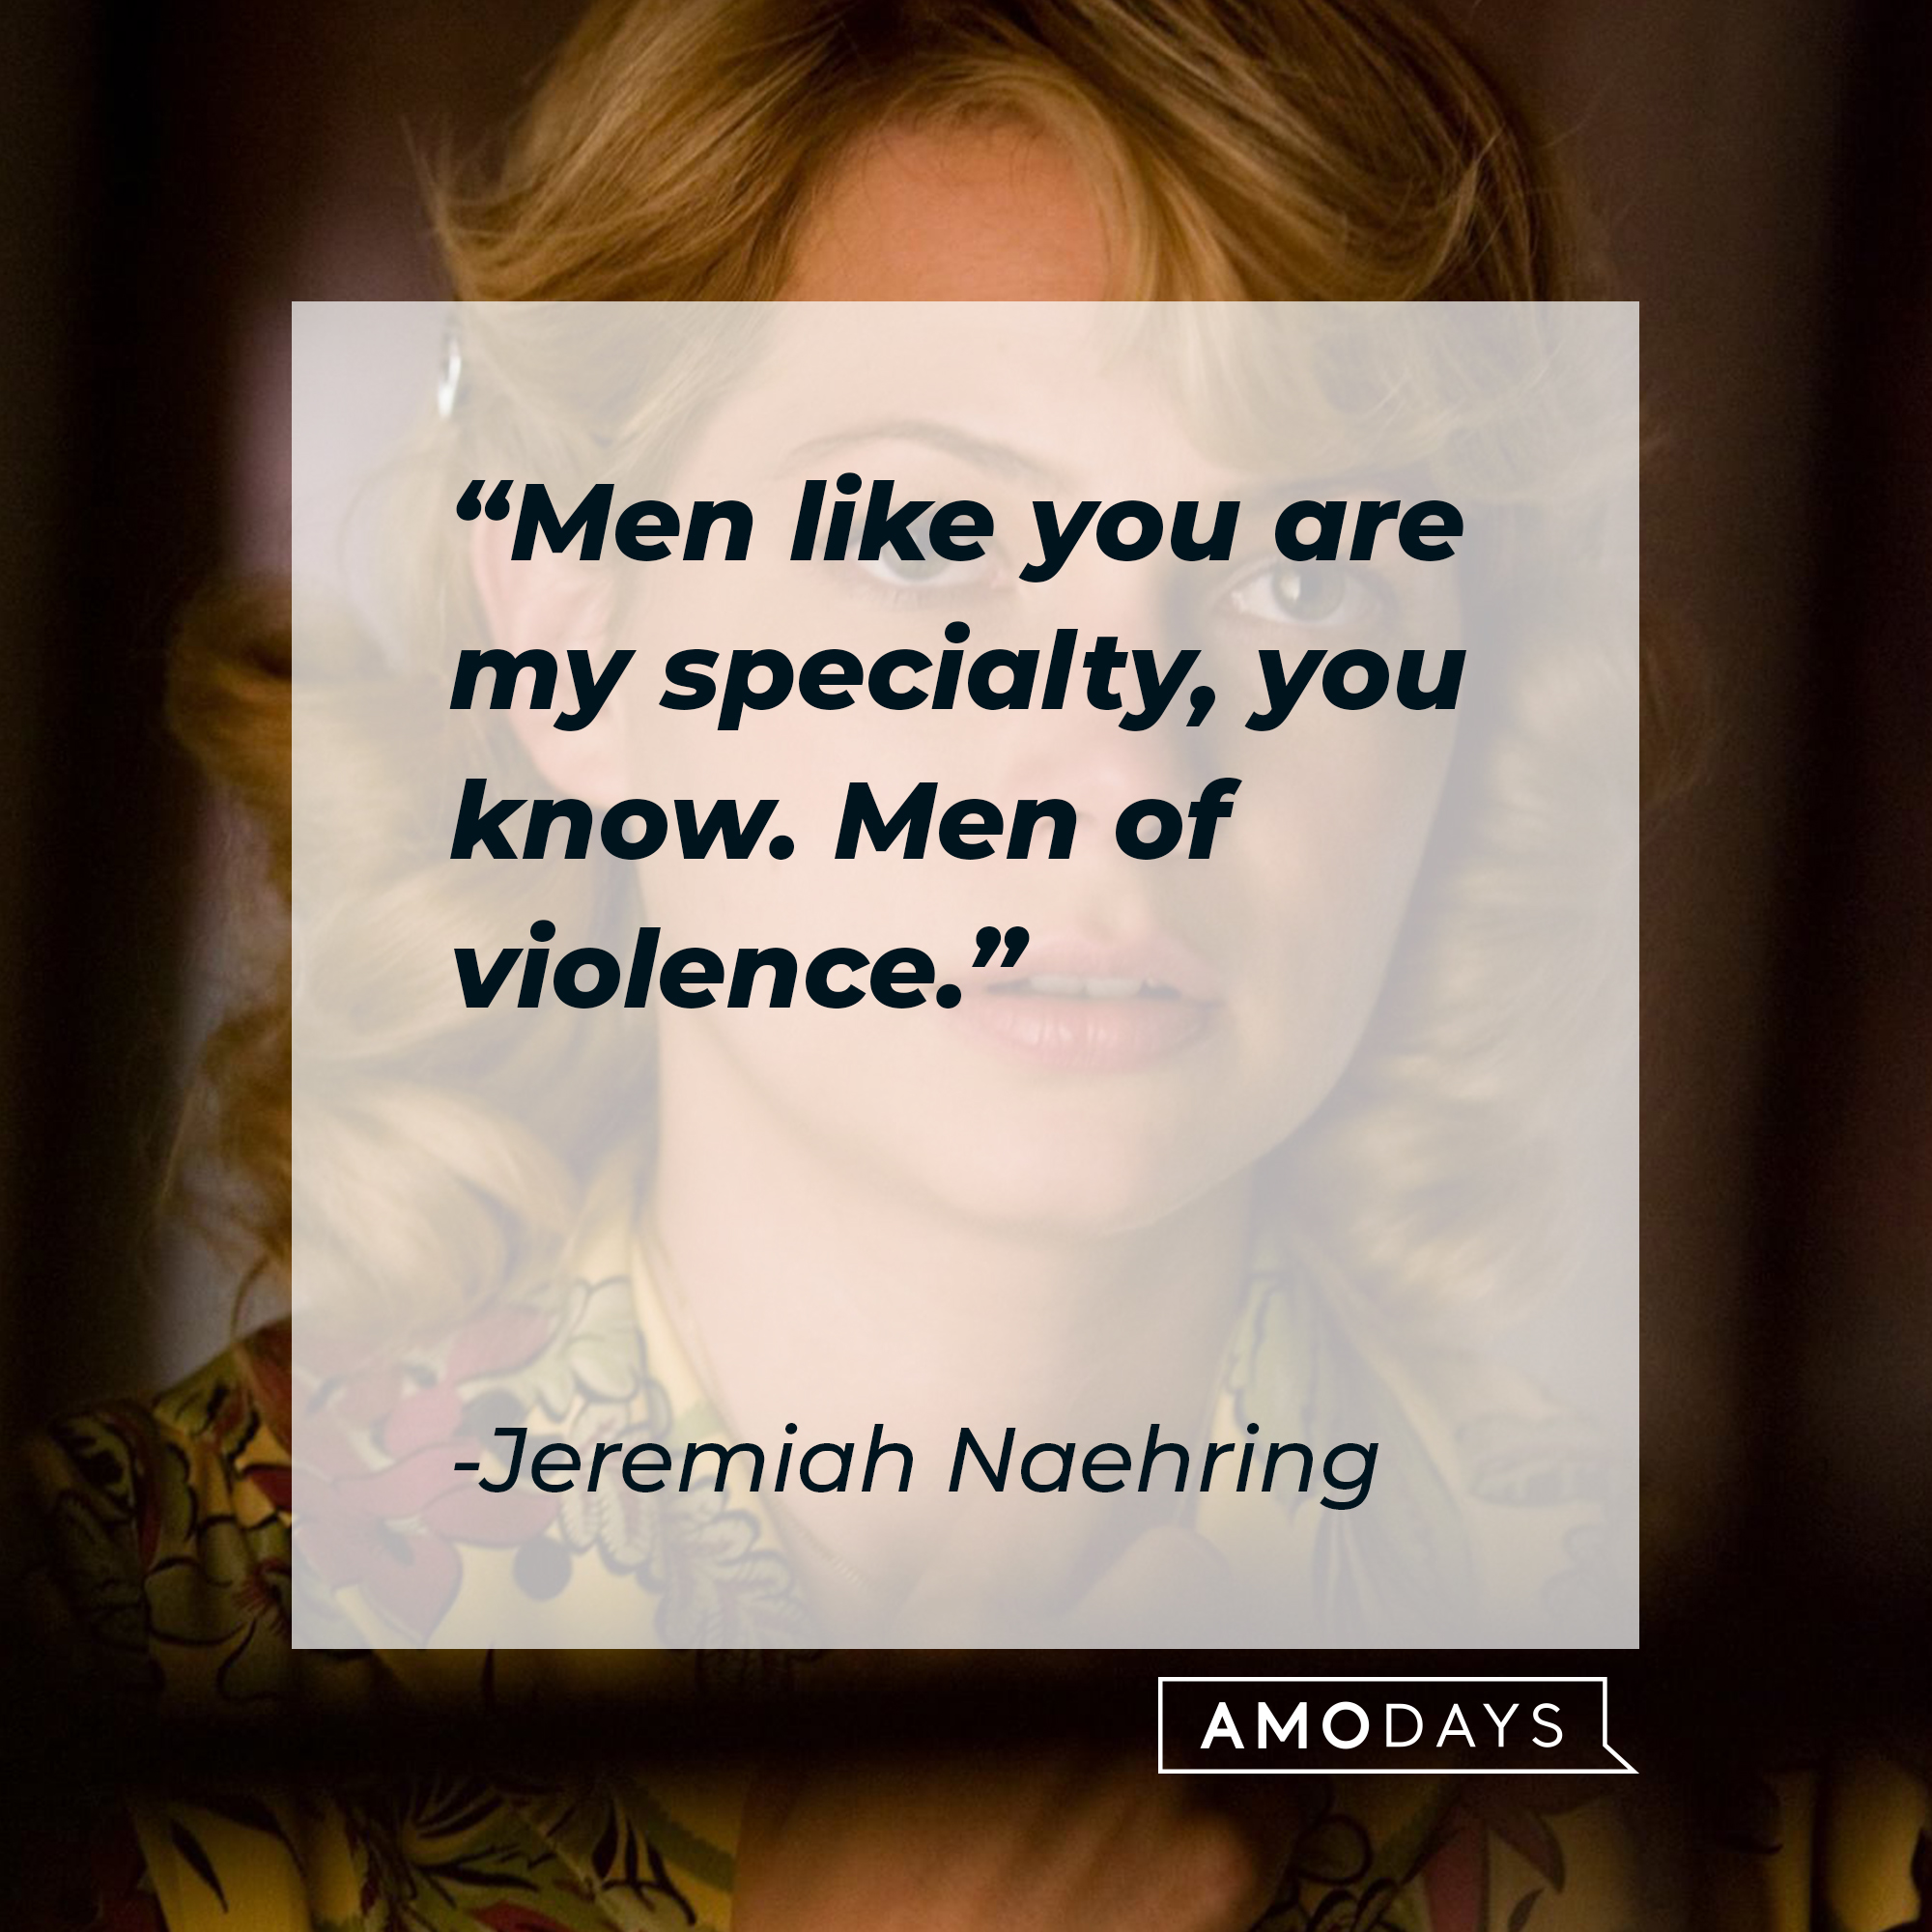 Dr. Jeremiah Naehring's quote: "Men like you are my specialty, you know. Men of violence." | Source: facebook.com/ShutterIsland